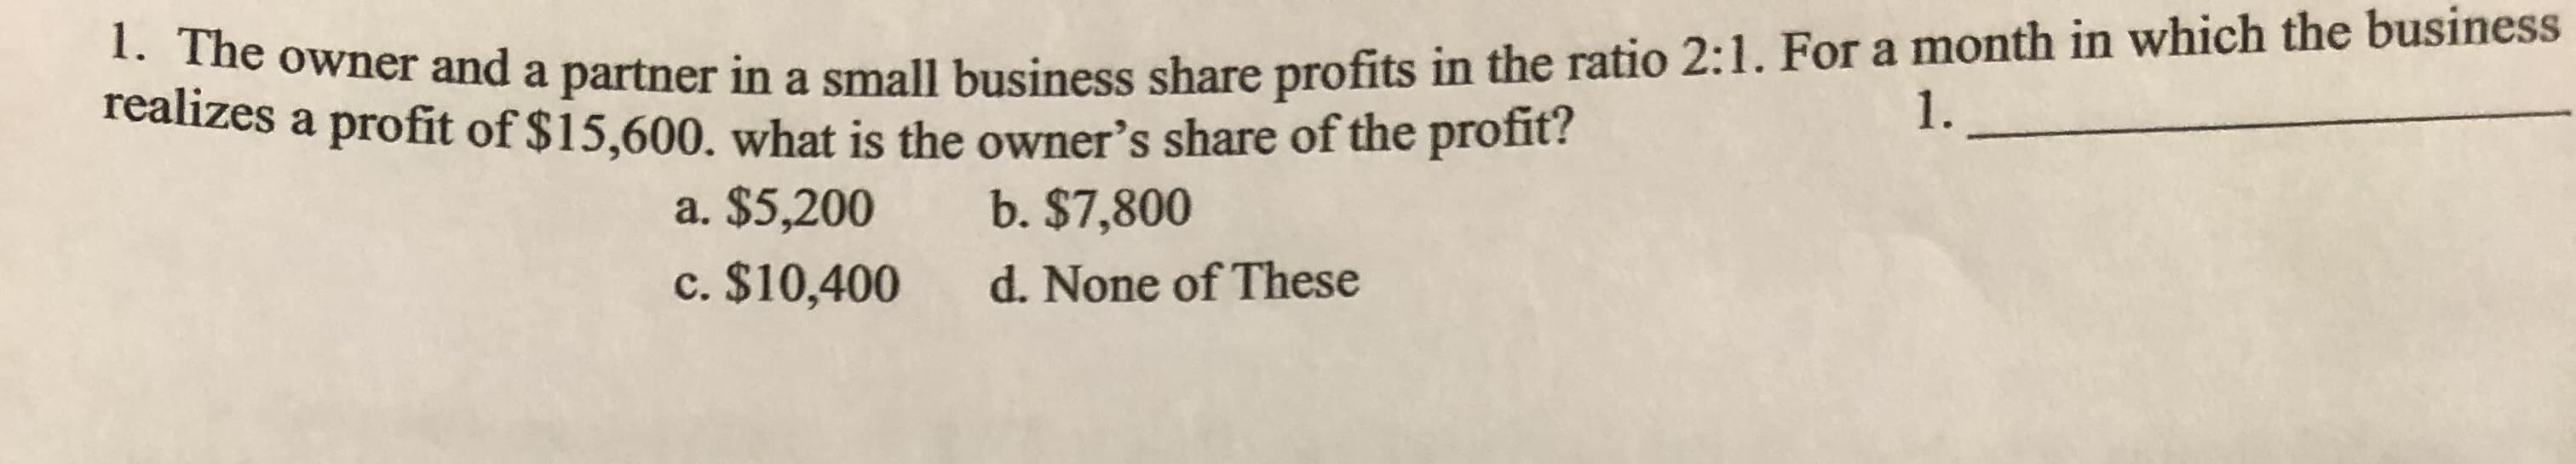 1. The owner and a partner in a small business share profits in the ratio 2:1. For a month in which the business
realizes a profit of $15,600. what is the owner's share of the profit?
1
a. $5,200
b. $7,800
c. $10,400
d. None of These
